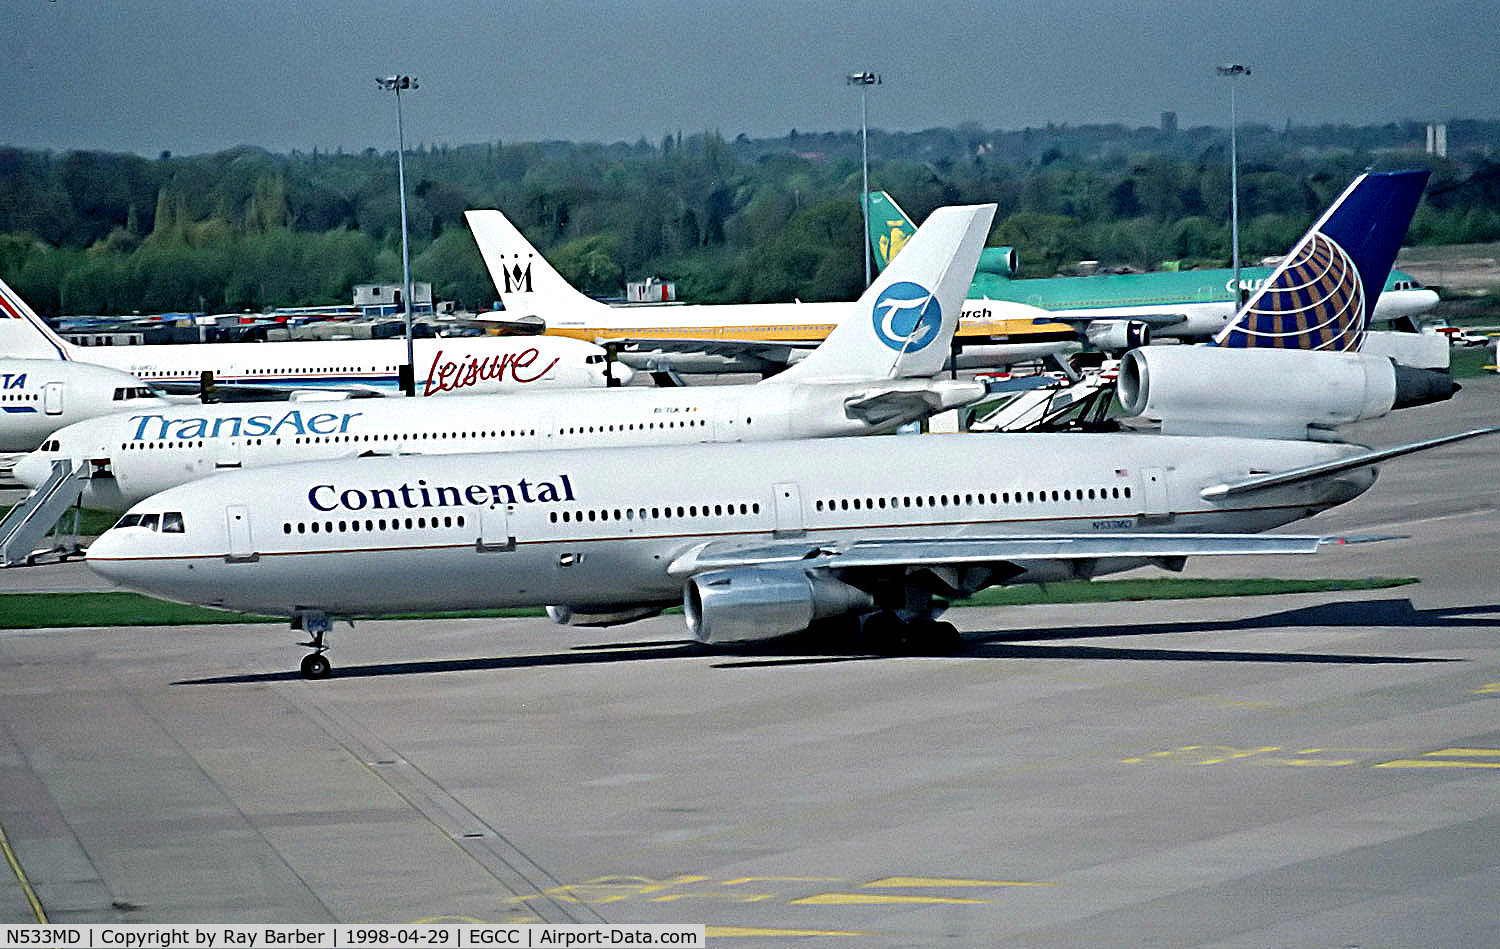 N533MD, 1973 Douglas DC-10-30 C/N 46553, N533MD   Douglas DC-10-30 [46553] (Continental Airlines) Manchester-Ringway~G @ 29/04/1998